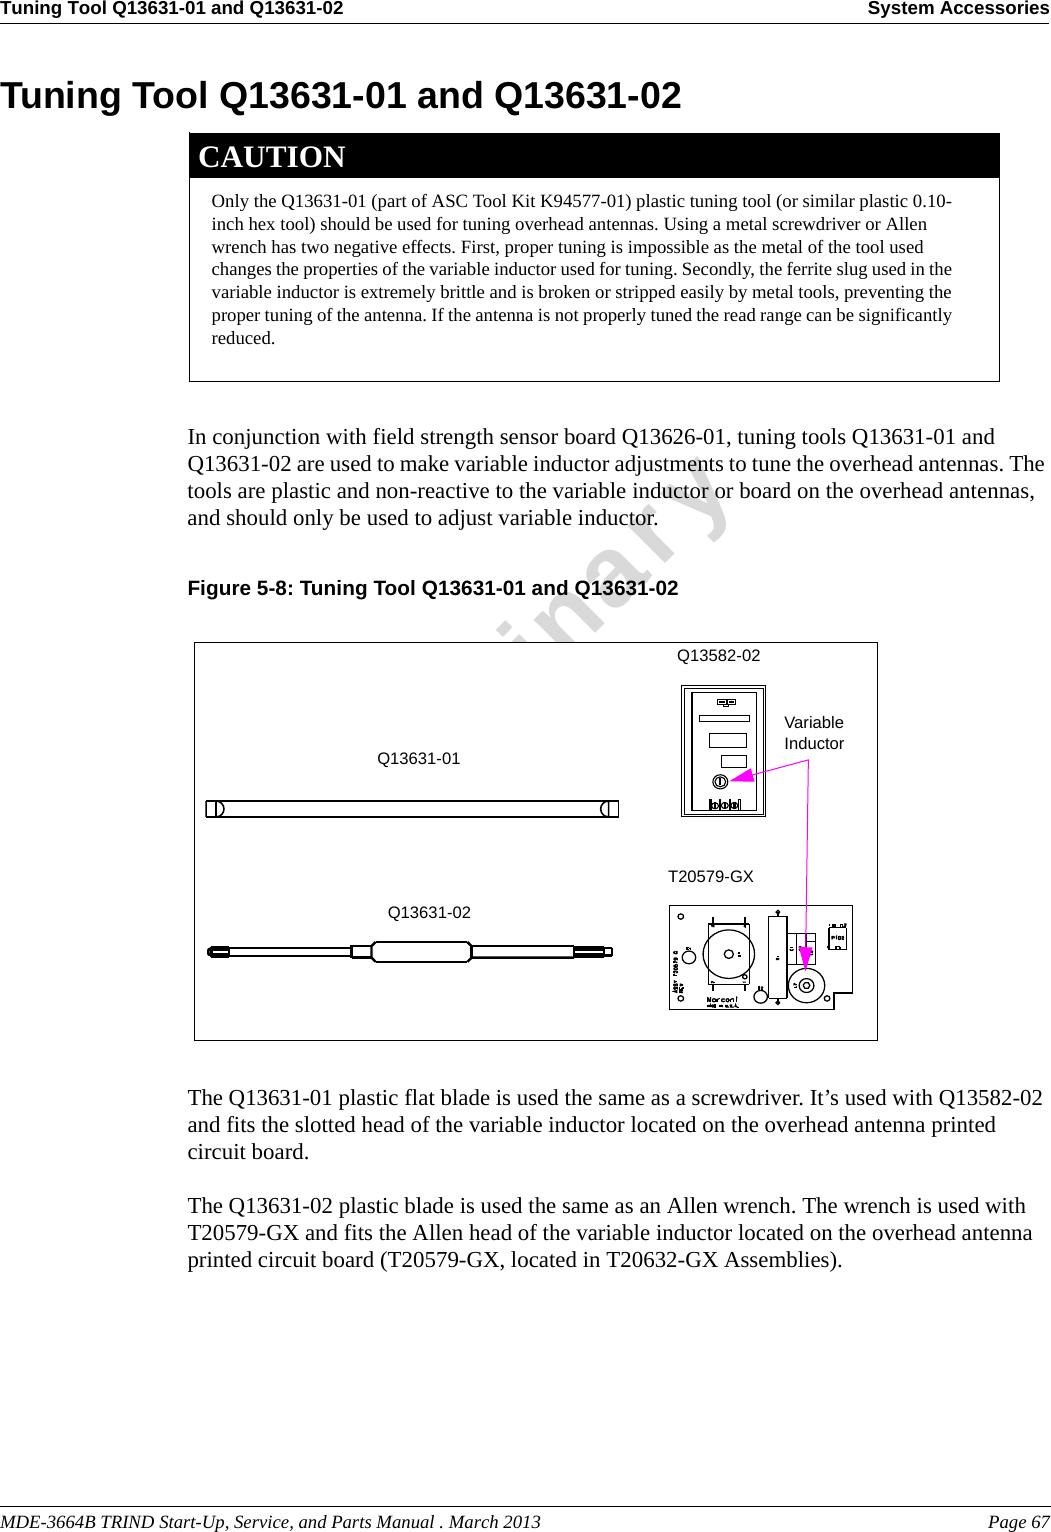 MDE-3664B TRIND Start-Up, Service, and Parts Manual . March 2013 Page 67Tuning Tool Q13631-01 and Q13631-02 System AccessoriesPreliminaryTuning Tool Q13631-01 and Q13631-02Only the Q13631-01 (part of ASC Tool Kit K94577-01) plastic tuning tool (or similar plastic 0.10-inch hex tool) should be used for tuning overhead antennas. Using a metal screwdriver or Allen wrench has two negative effects. First, proper tuning is impossible as the metal of the tool used changes the properties of the variable inductor used for tuning. Secondly, the ferrite slug used in the variable inductor is extremely brittle and is broken or stripped easily by metal tools, preventing the proper tuning of the antenna. If the antenna is not properly tuned the read range can be significantly reduced.CAUTIONIn conjunction with field strength sensor board Q13626-01, tuning tools Q13631-01 and Q13631-02 are used to make variable inductor adjustments to tune the overhead antennas. The tools are plastic and non-reactive to the variable inductor or board on the overhead antennas, and should only be used to adjust variable inductor.Figure 5-8: Tuning Tool Q13631-01 and Q13631-02 Q13631-01Q13631-02Variable InductorQ13582-02T20579-GXThe Q13631-01 plastic flat blade is used the same as a screwdriver. It’s used with Q13582-02 and fits the slotted head of the variable inductor located on the overhead antenna printed circuit board.The Q13631-02 plastic blade is used the same as an Allen wrench. The wrench is used with T20579-GX and fits the Allen head of the variable inductor located on the overhead antenna printed circuit board (T20579-GX, located in T20632-GX Assemblies).